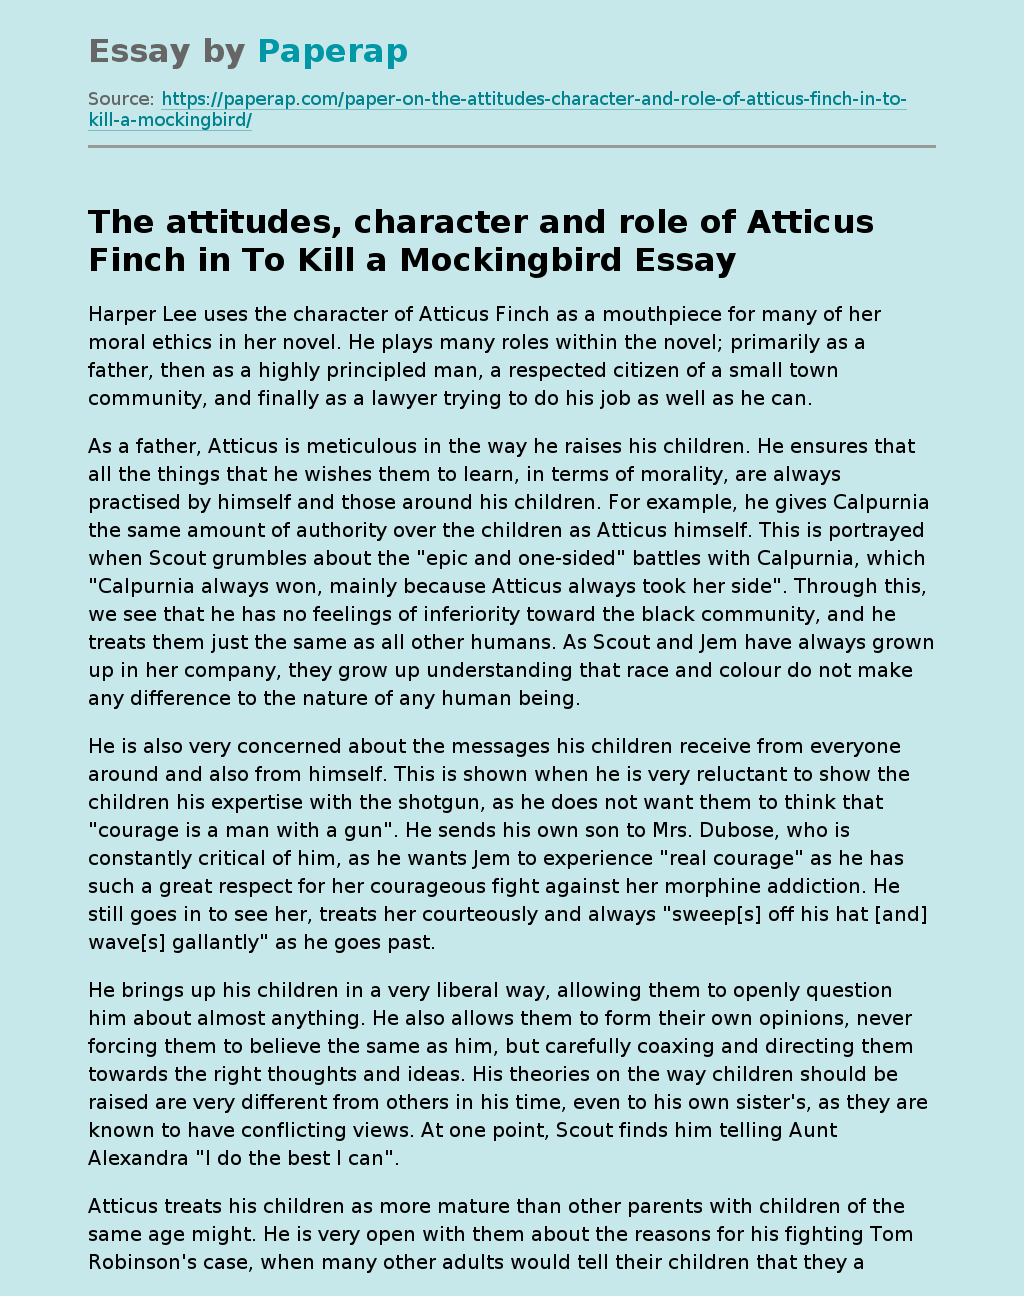 The attitudes, character and role of Atticus Finch in To Kill a Mockingbird